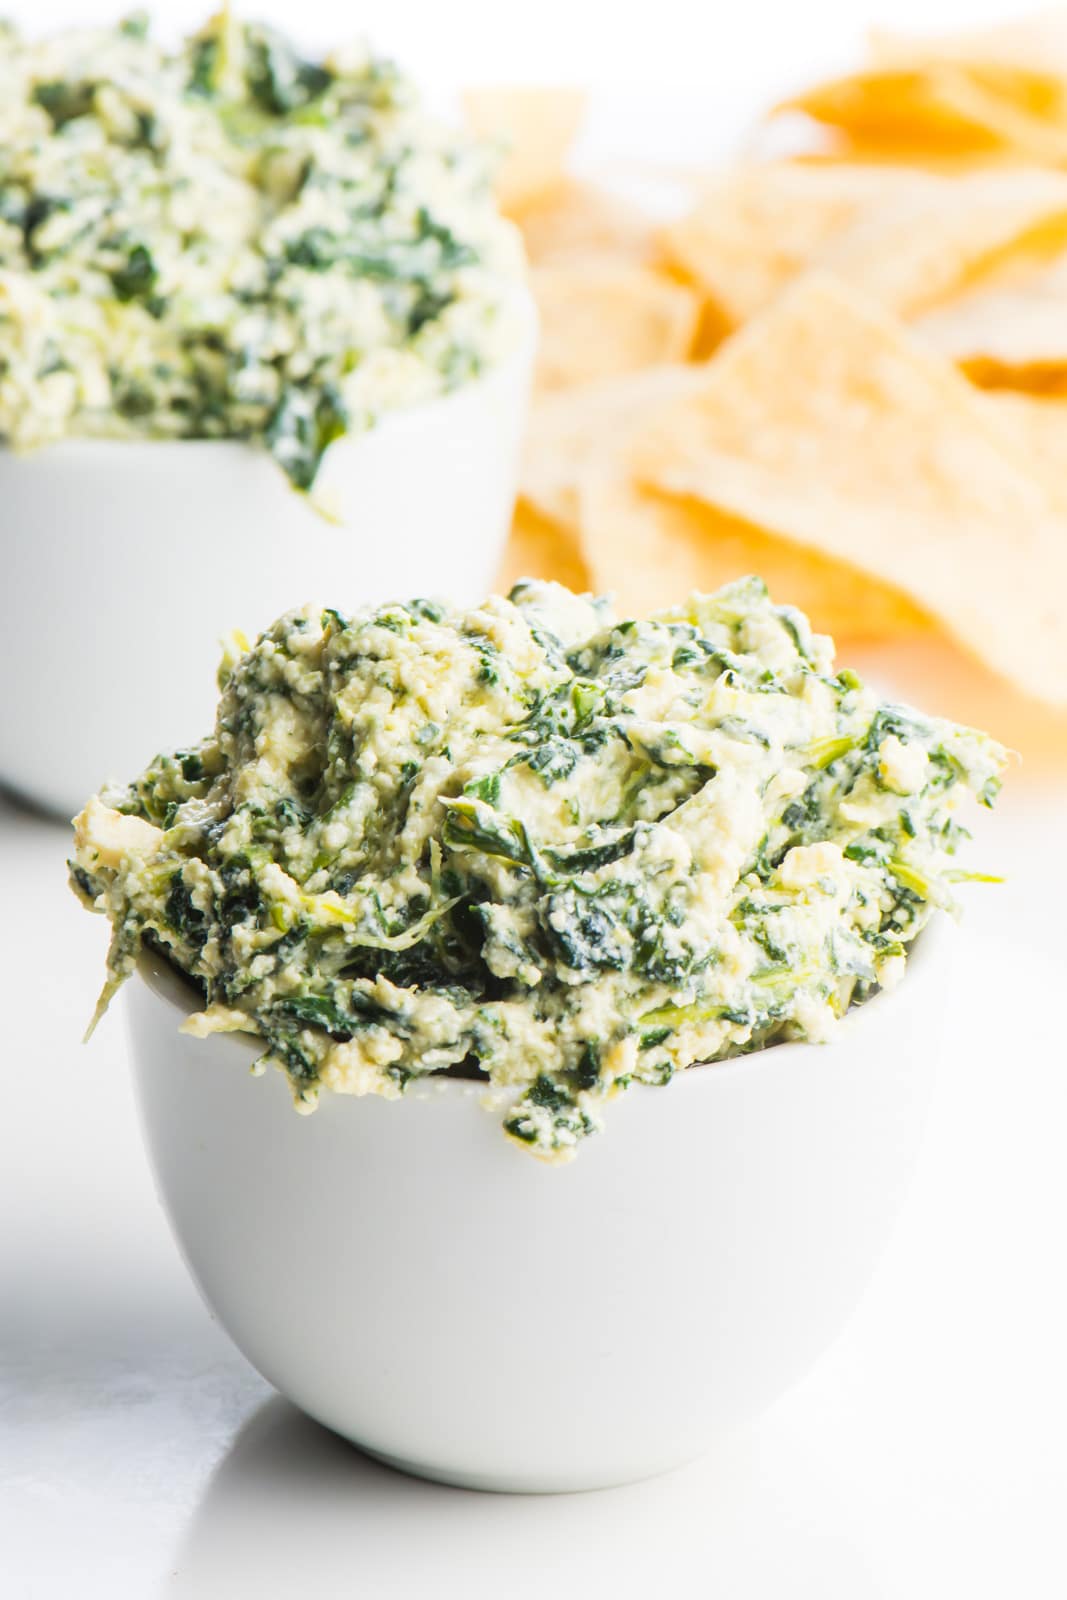 Two white dishes hold vegan spinach dip, one in front of the other. A pile of tortilla chips sit in the background.